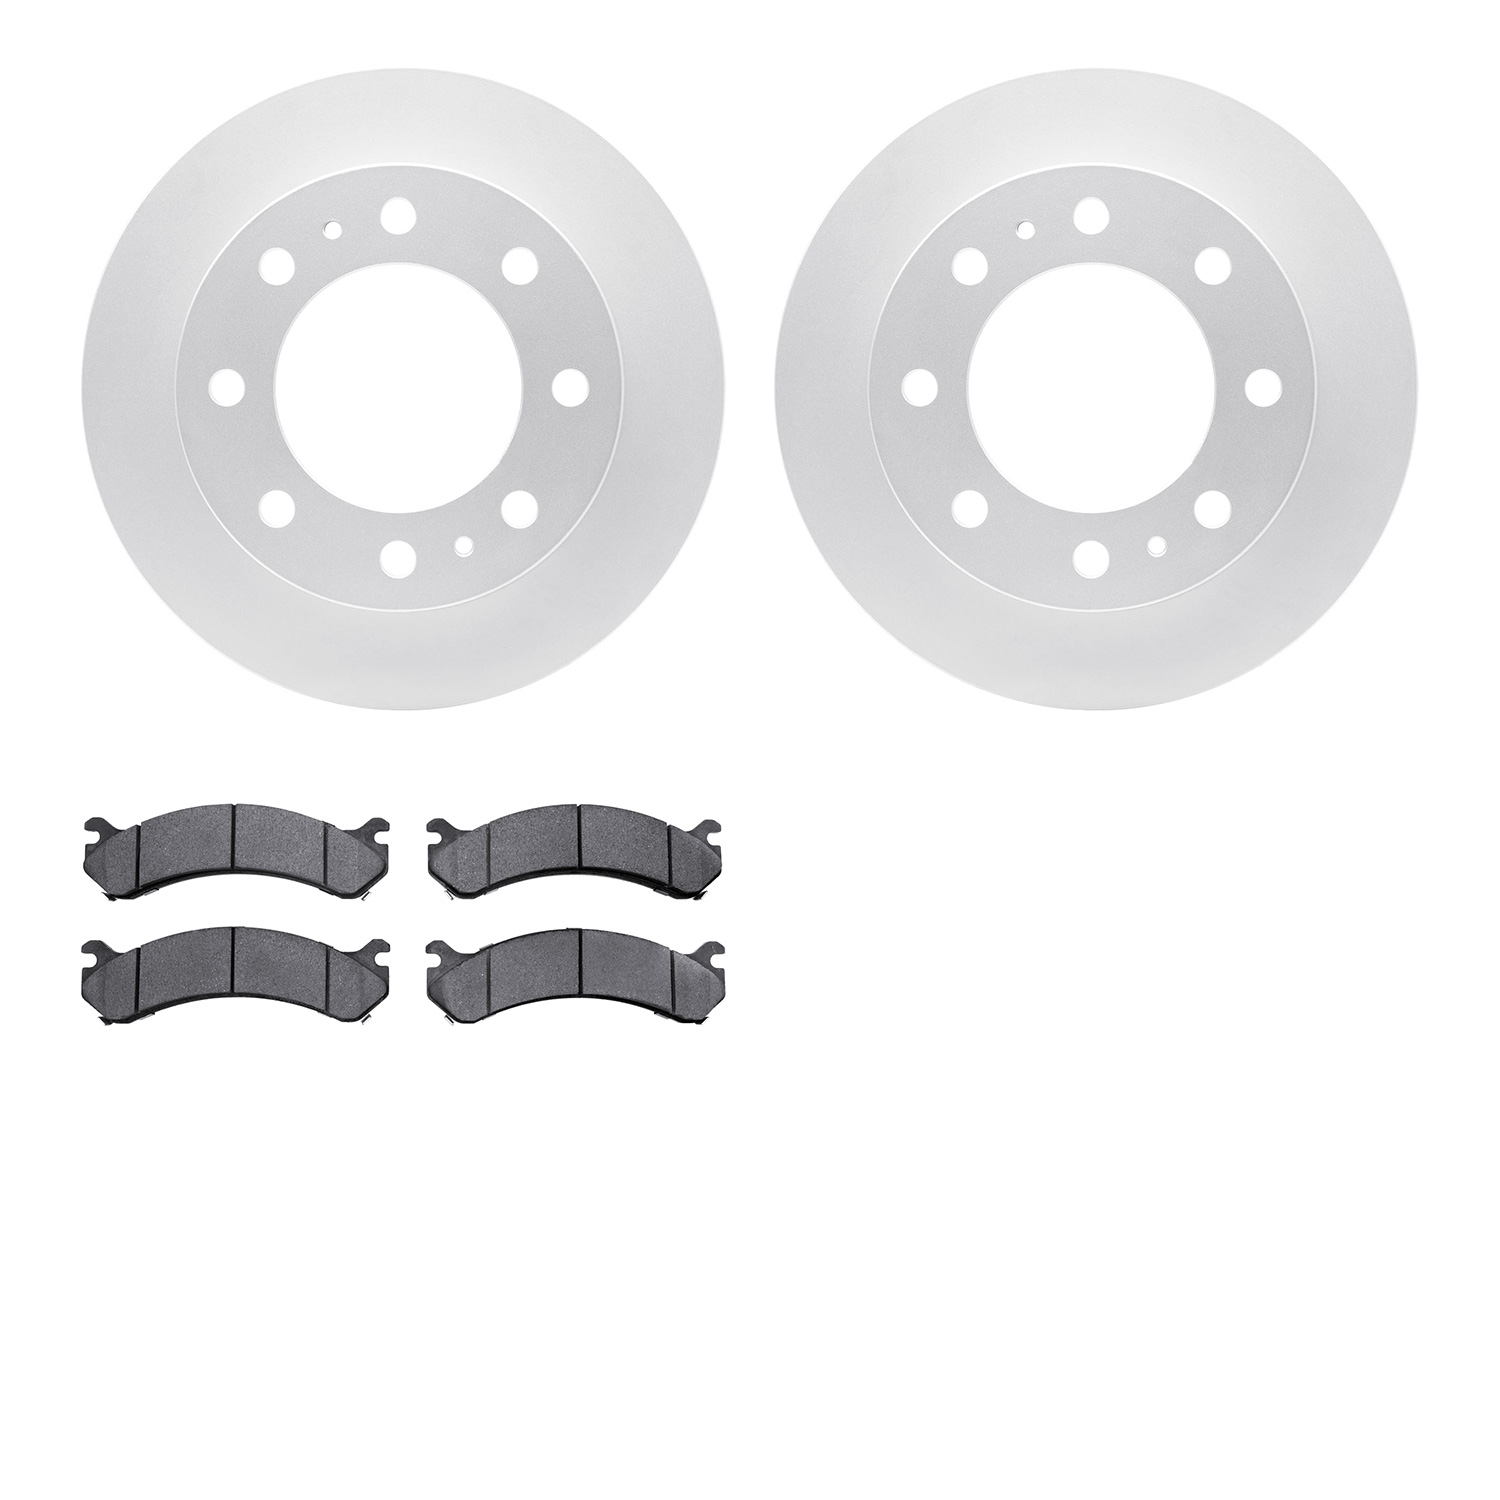 4402-48014 Geospec Brake Rotors with Ultimate-Duty Brake Pads Kit, 1999-2020 GM, Position: Front